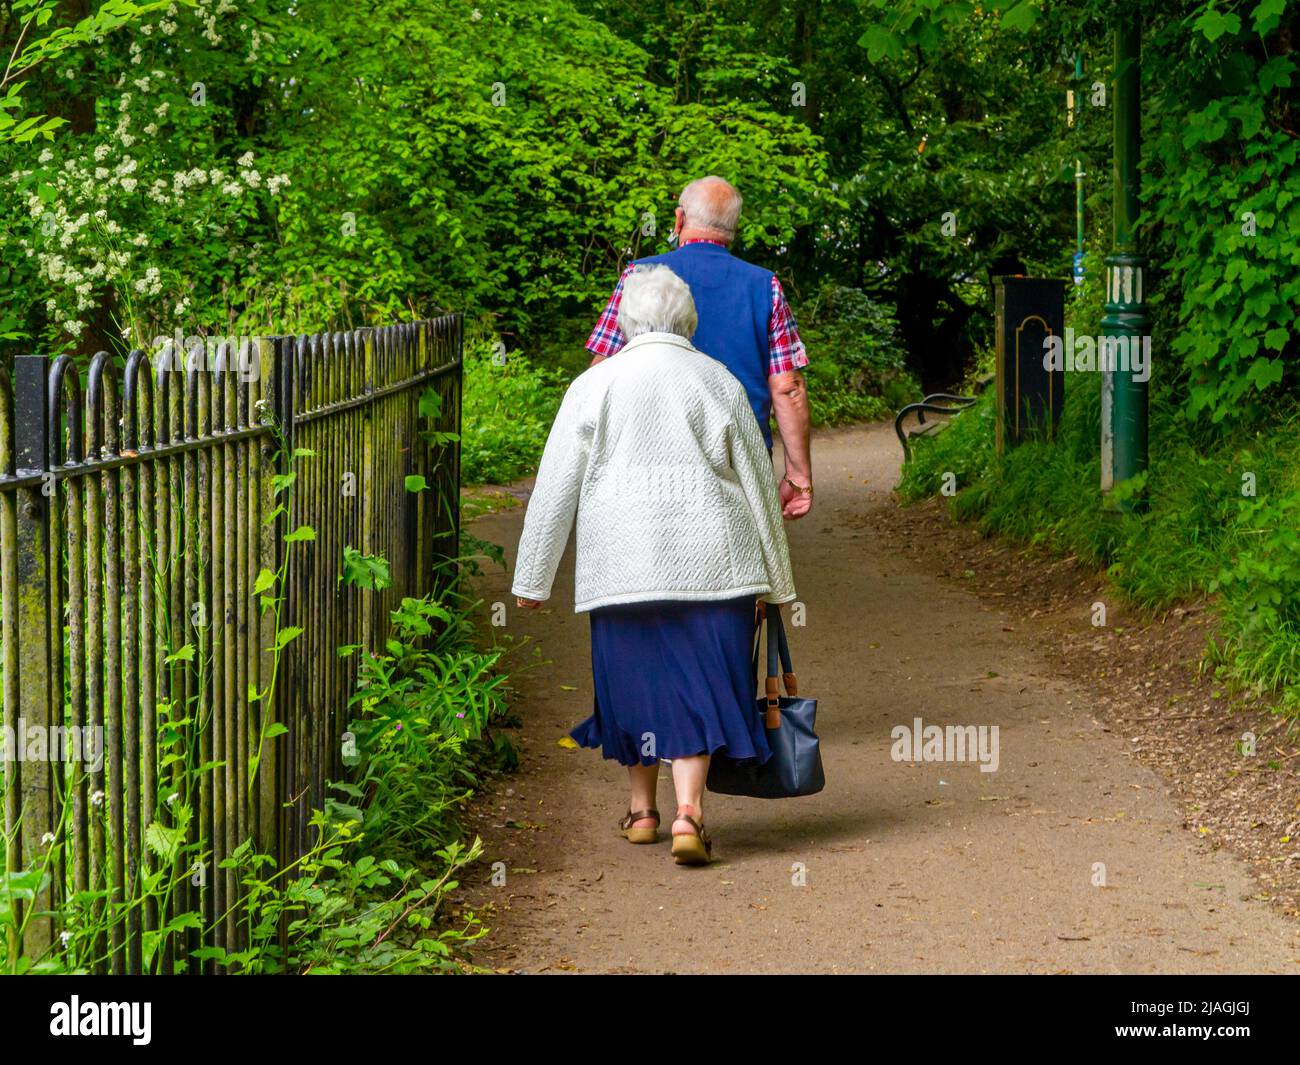 Elderly couple walking on a footpath in a public park with metal fence and trees. Stock Photo